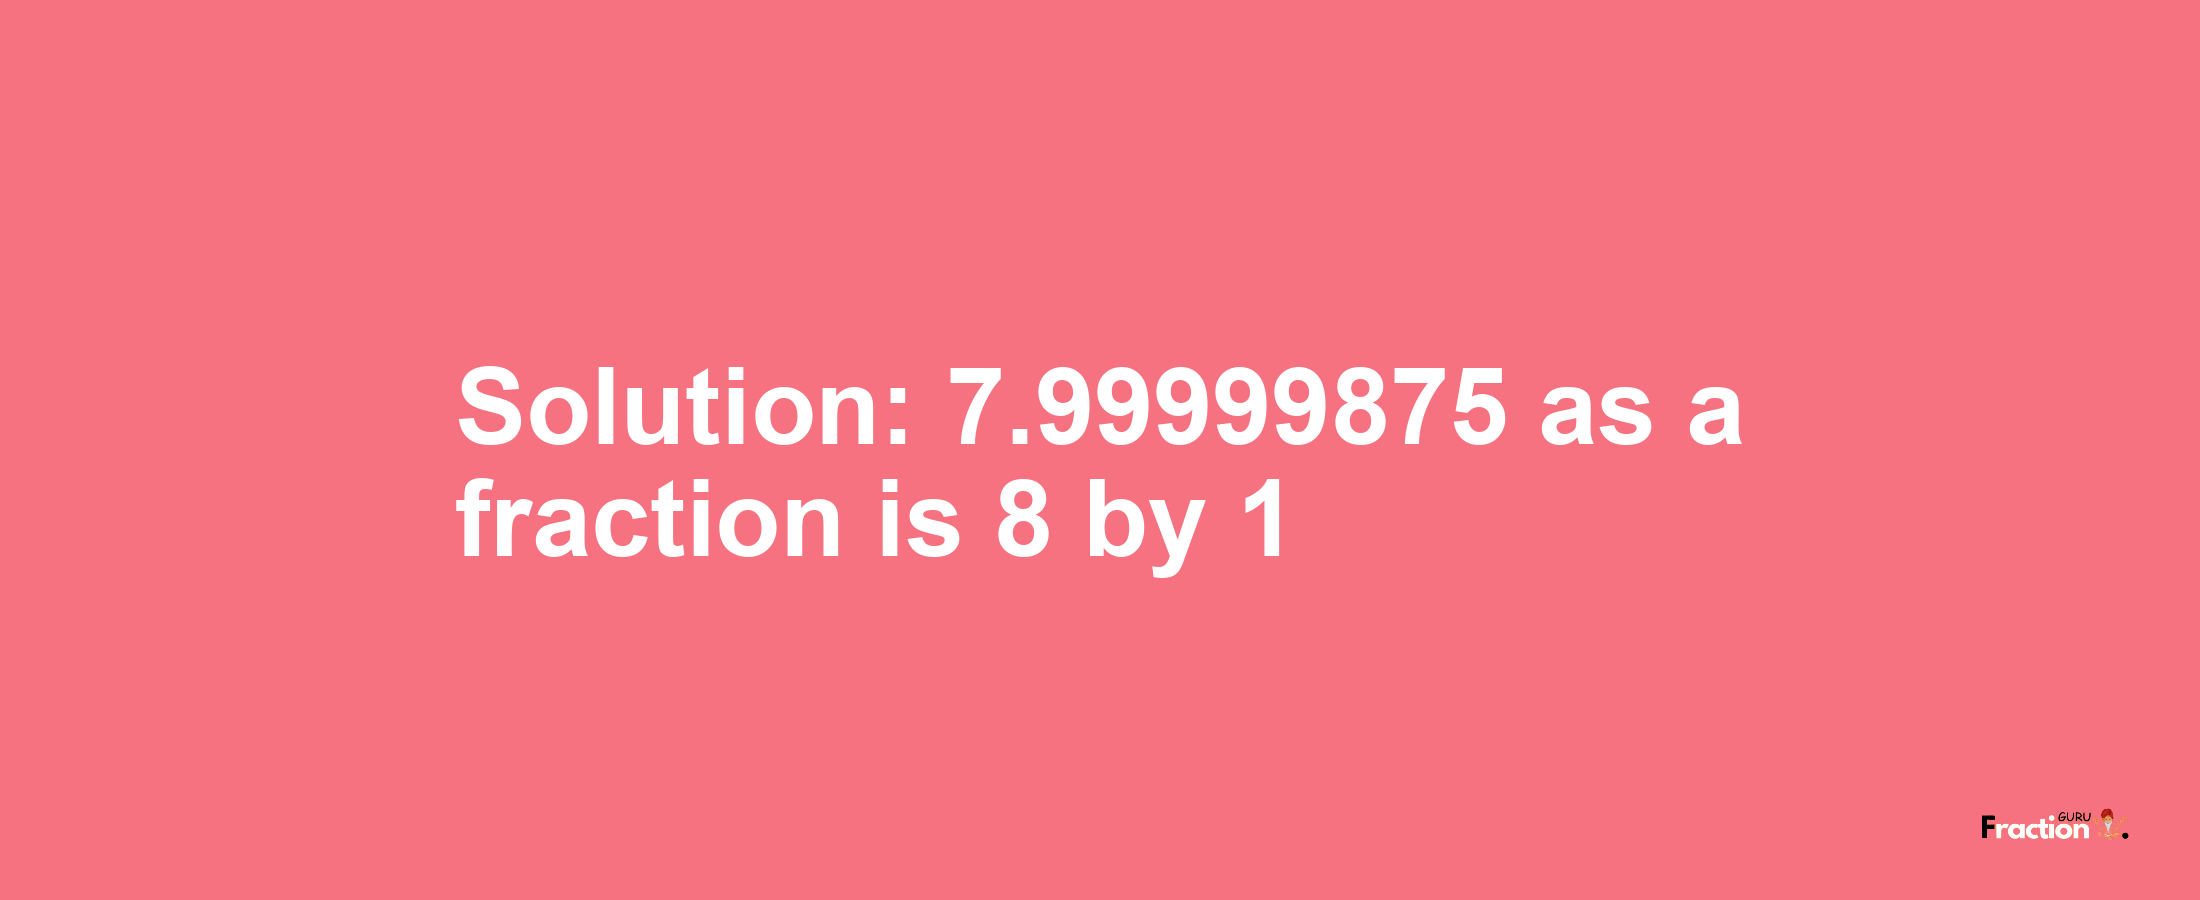 Solution:7.99999875 as a fraction is 8/1